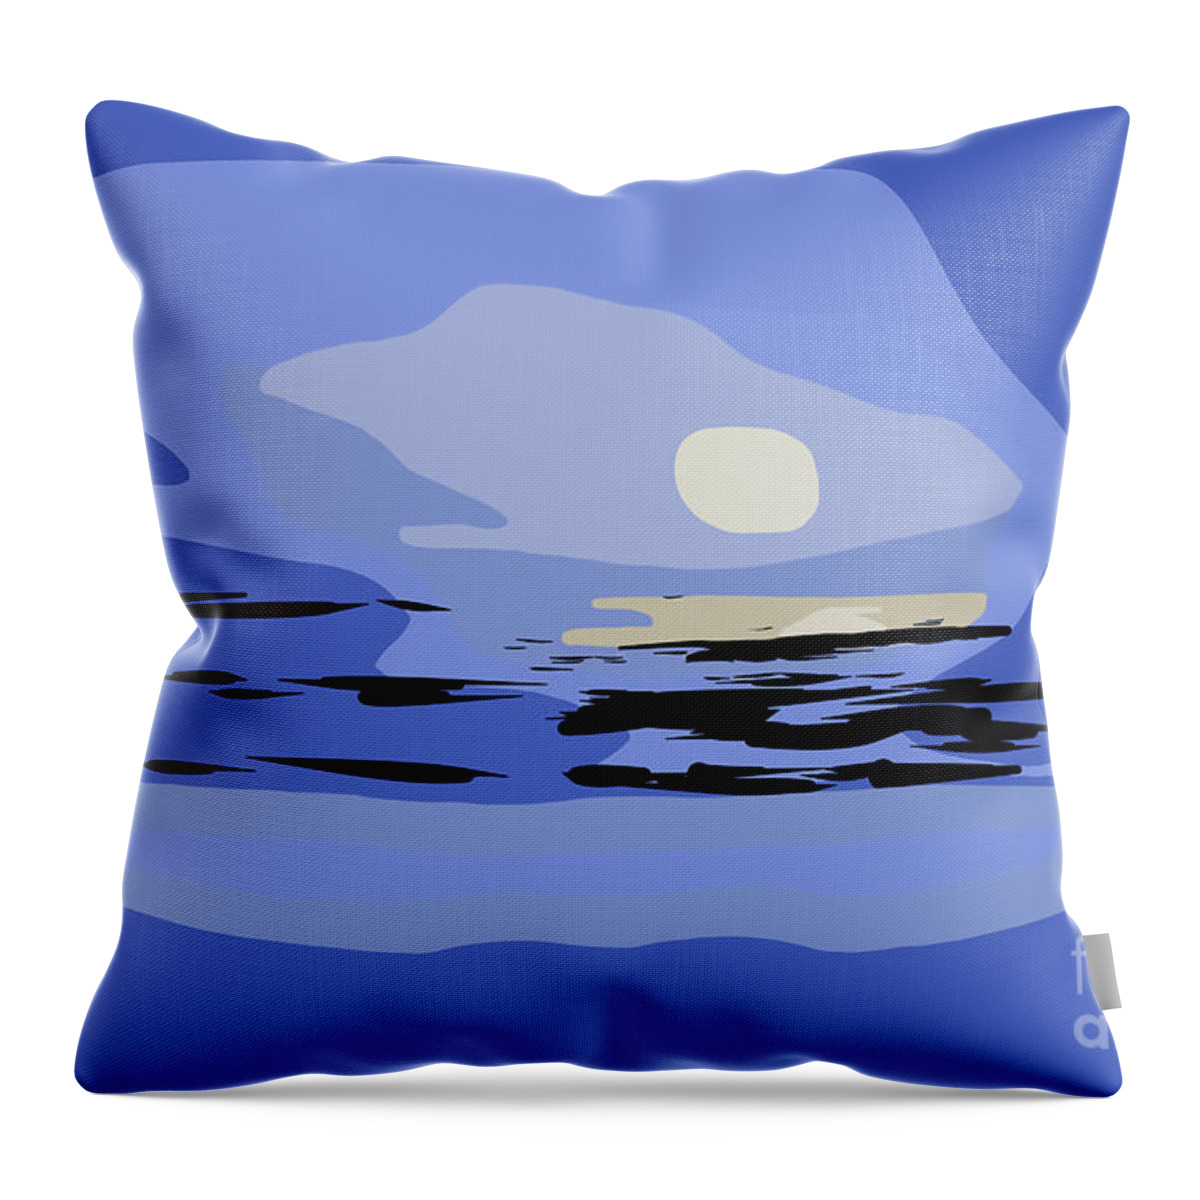 Abstract Throw Pillow featuring the digital art Abstract Coastal Moon Setting by Kirt Tisdale